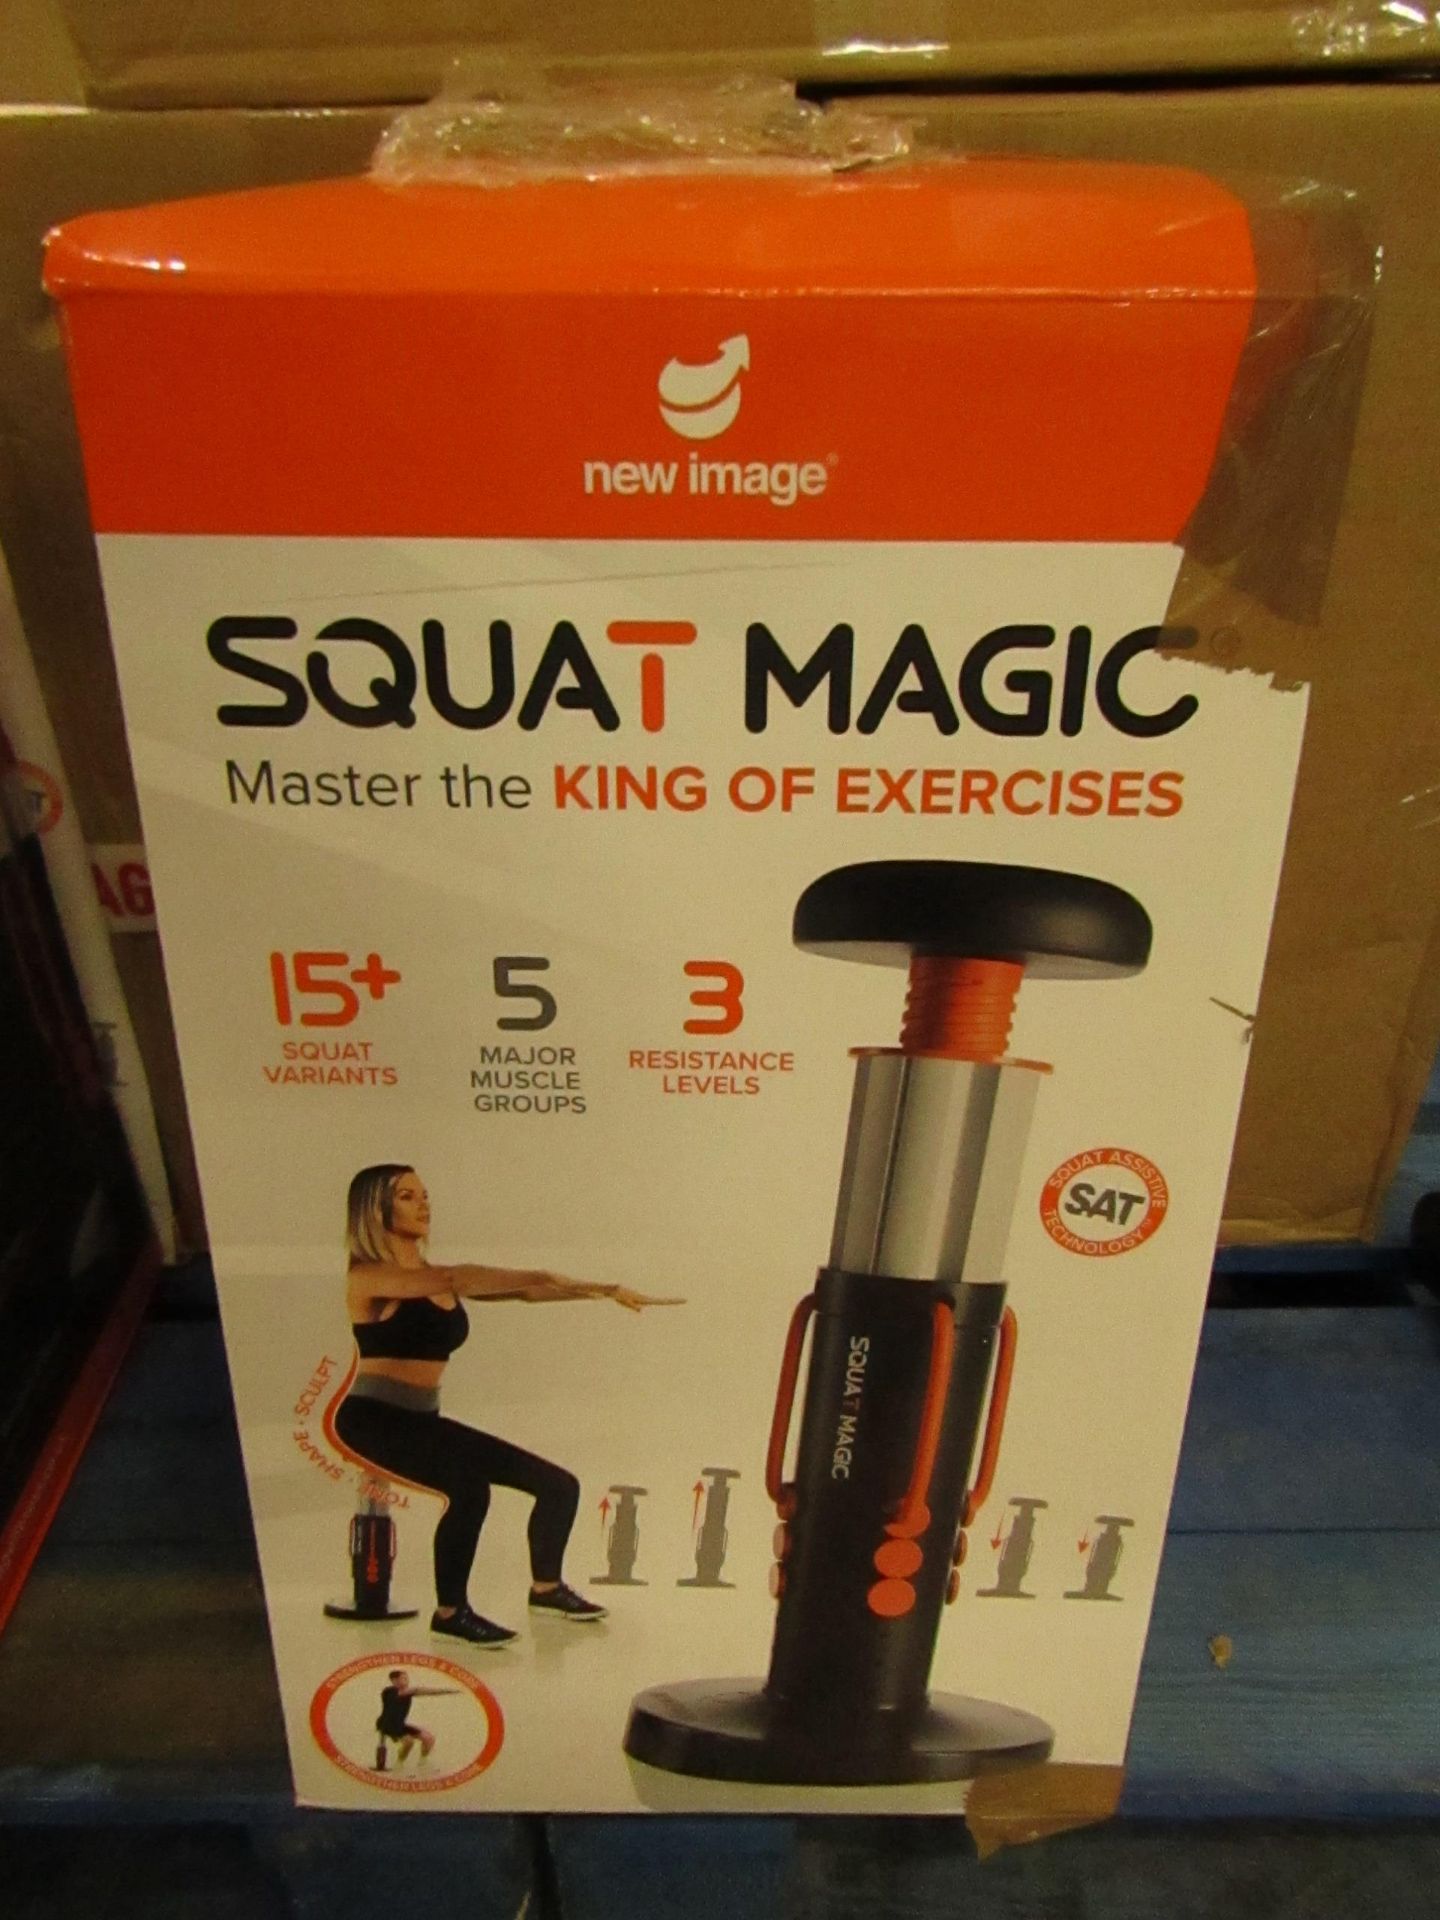 |1X | NEW IMAGE SQUART MAGIC | NO ONLINE RESALE | SKU - | RRP £59.99 BOXED- UNCHECKED |